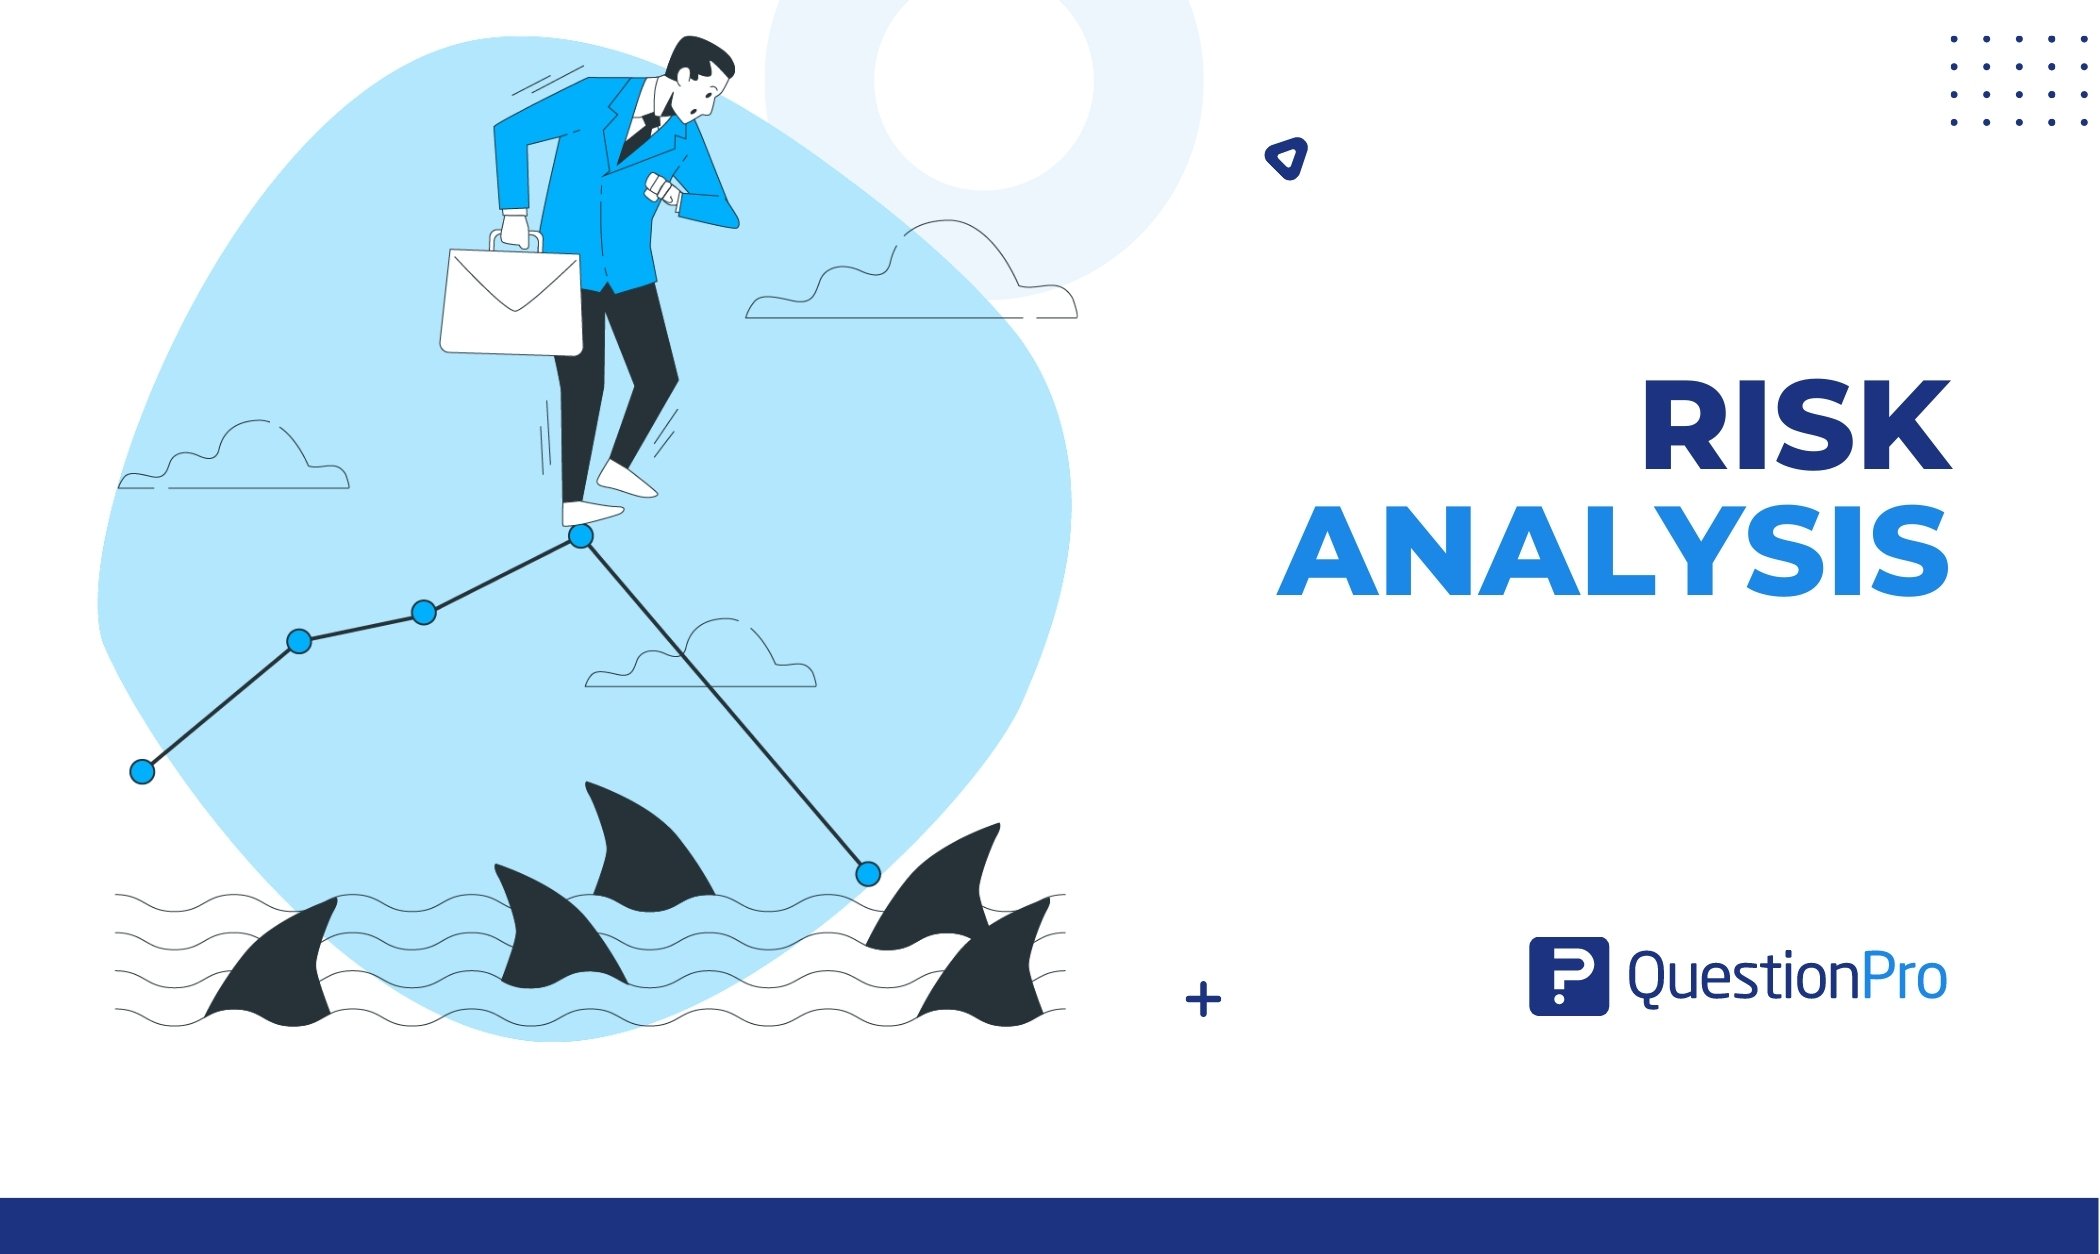 Risk Analysis: Definition, types + analysis process steps